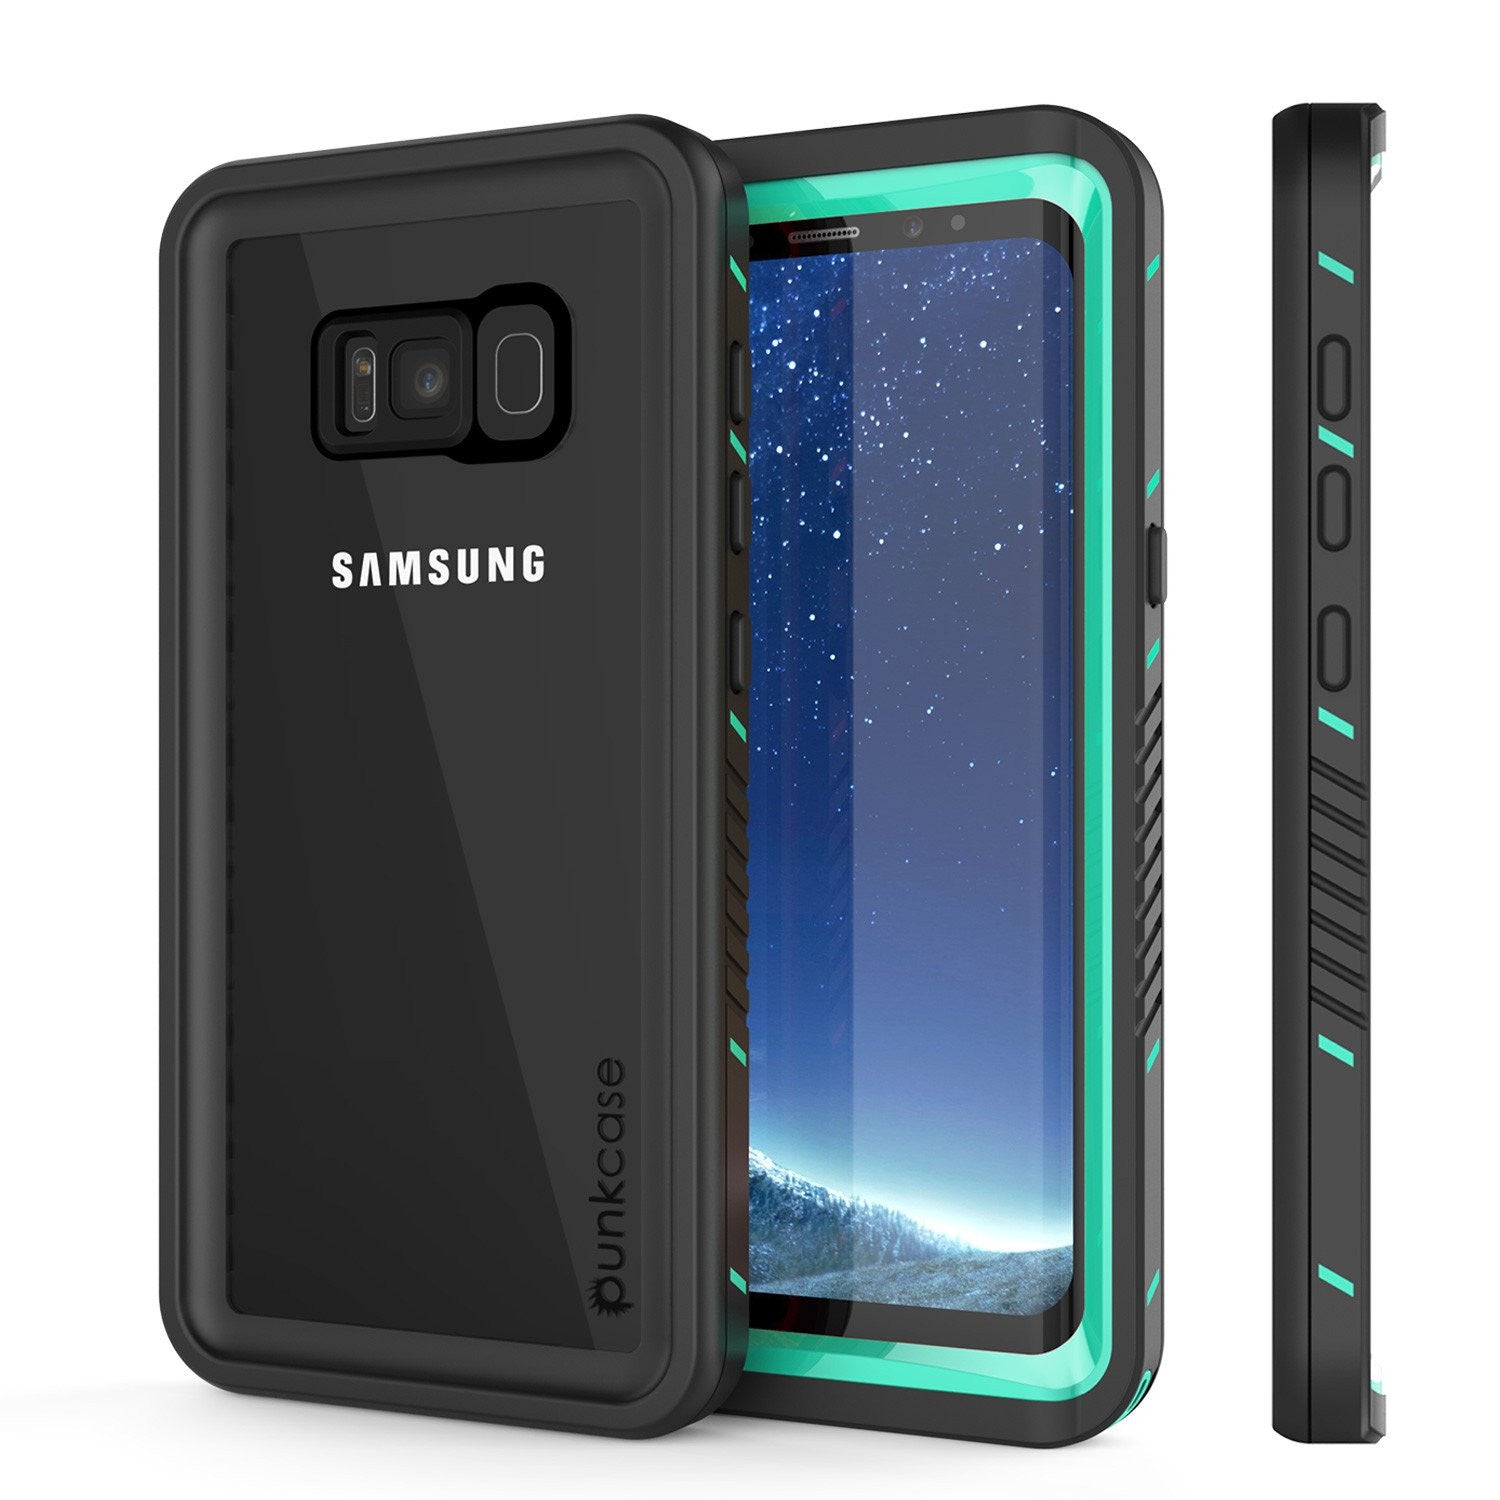 Galaxy S8 PLUS Waterproof Case, Punkcase [Extreme Series] [Slim Fit] [IP68 Certified] [Shockproof] [Snowproof] [Dirproof] Armor Cover W/ Built In Screen Protector for Samsung Galaxy S8+ [Teal] (Color in image: Teal)